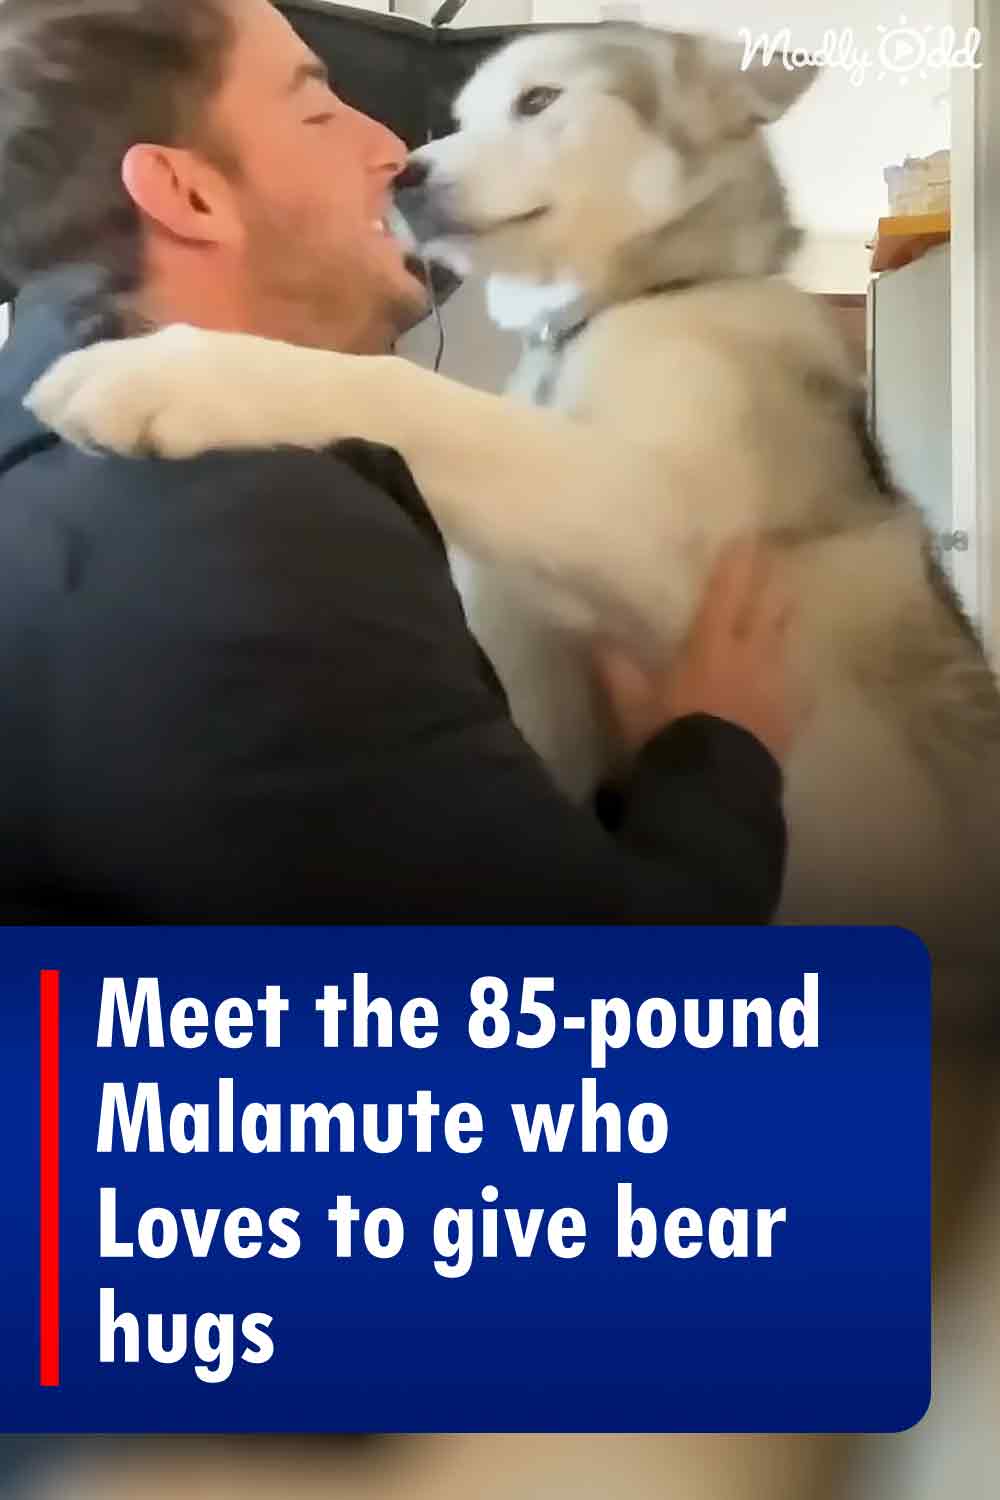 Meet the 85-pound Malamute who Loves to give bear hugs